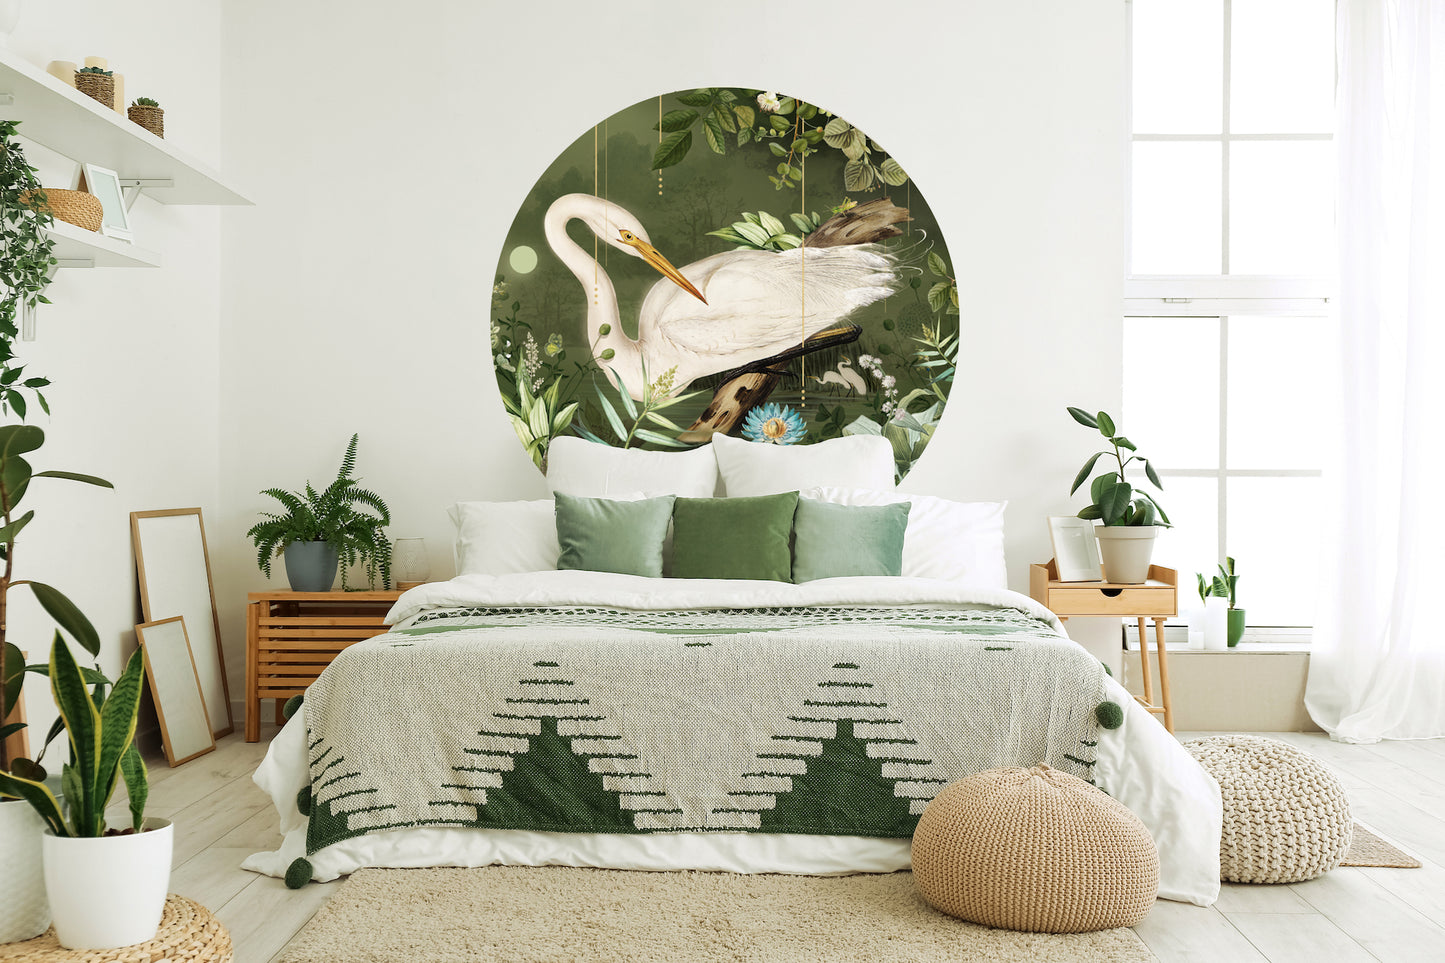 "Emerald Oasis" Self-adhesive wallpaper, round forest wall decal.